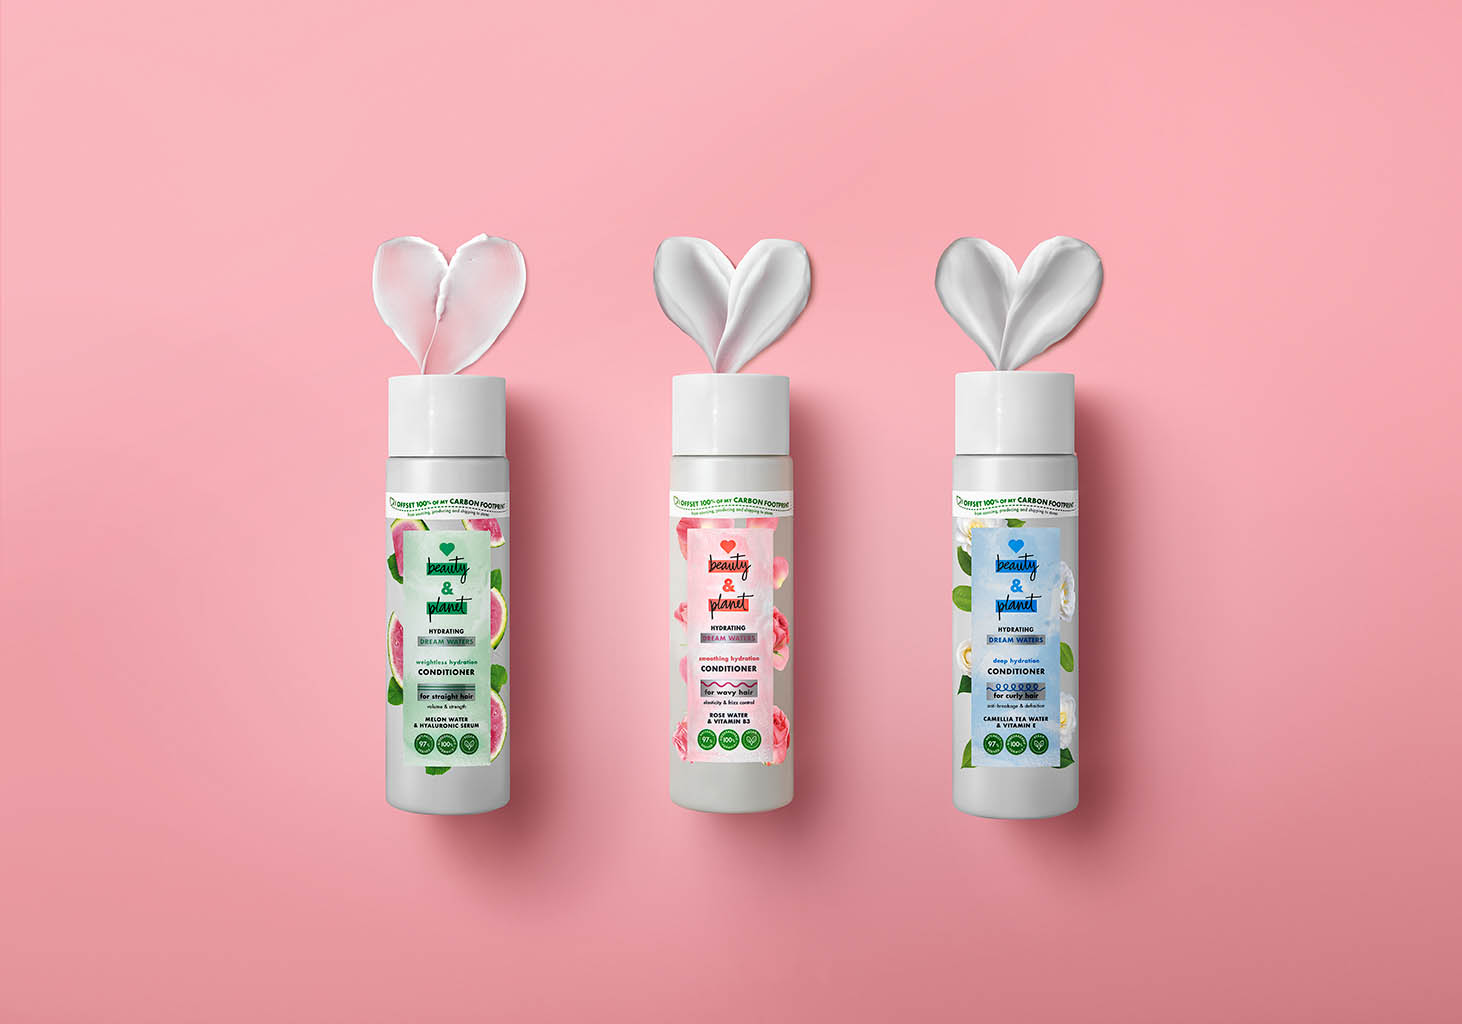 Packshot Factory - Haircare - Love Beauty and Planet hair care